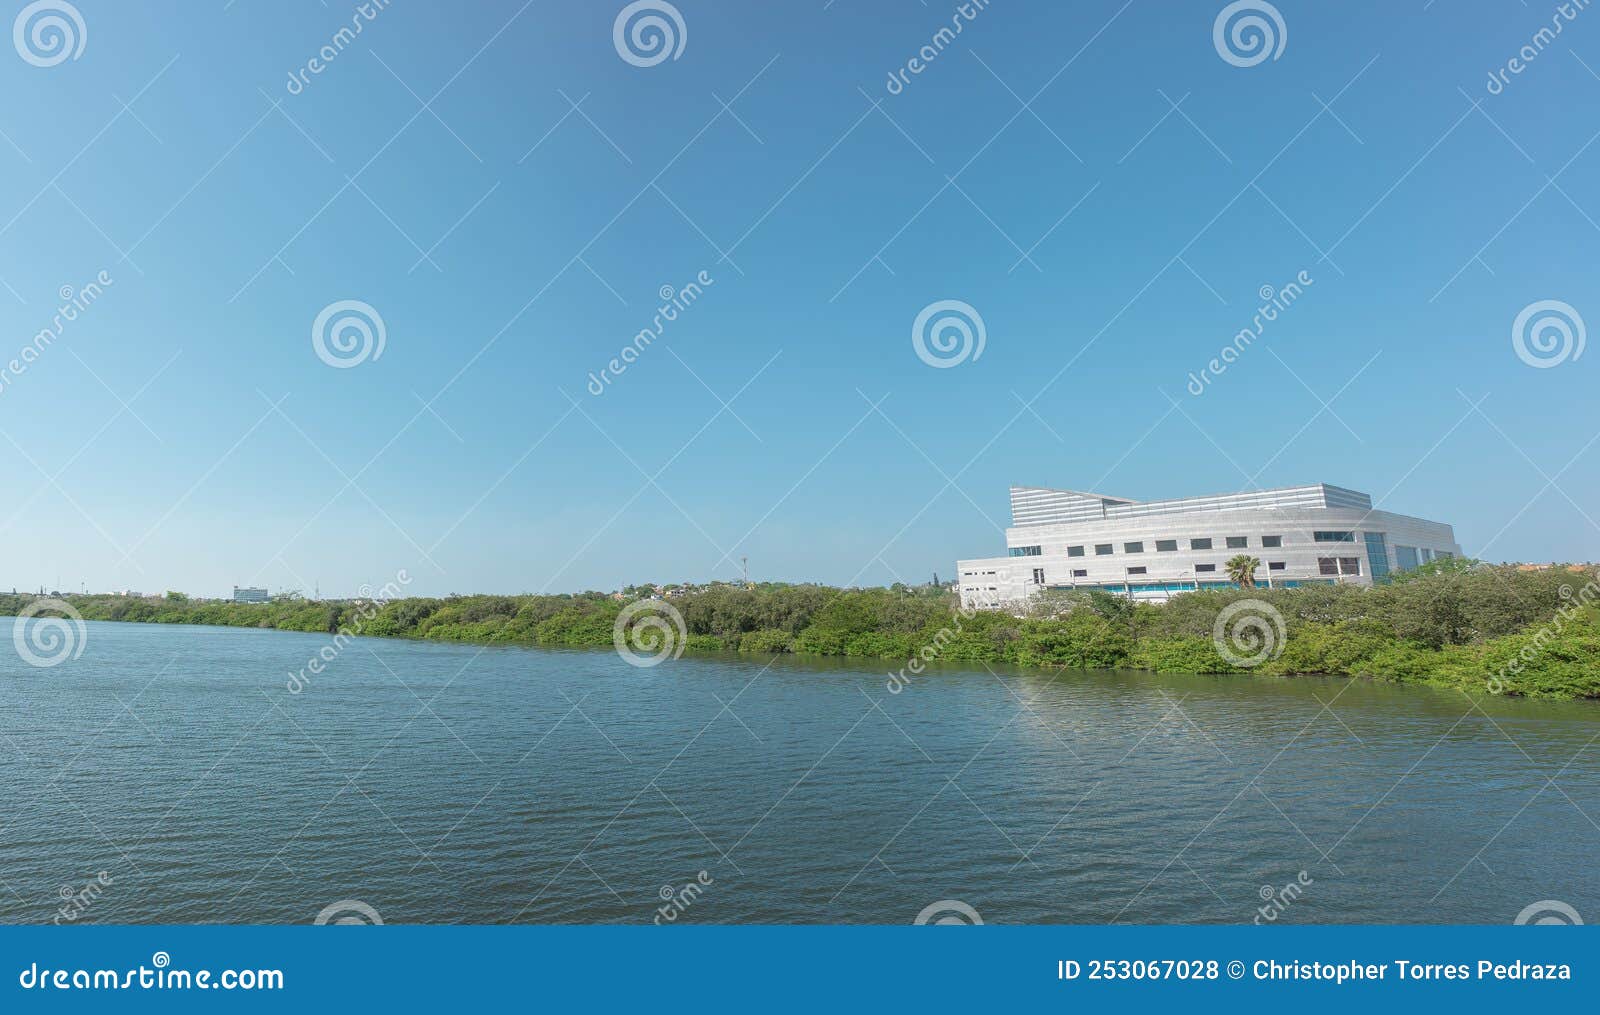 lake with calm water, green trees, blue sky and a building in the background, laguna del carpintero in tampico tamaulipas,